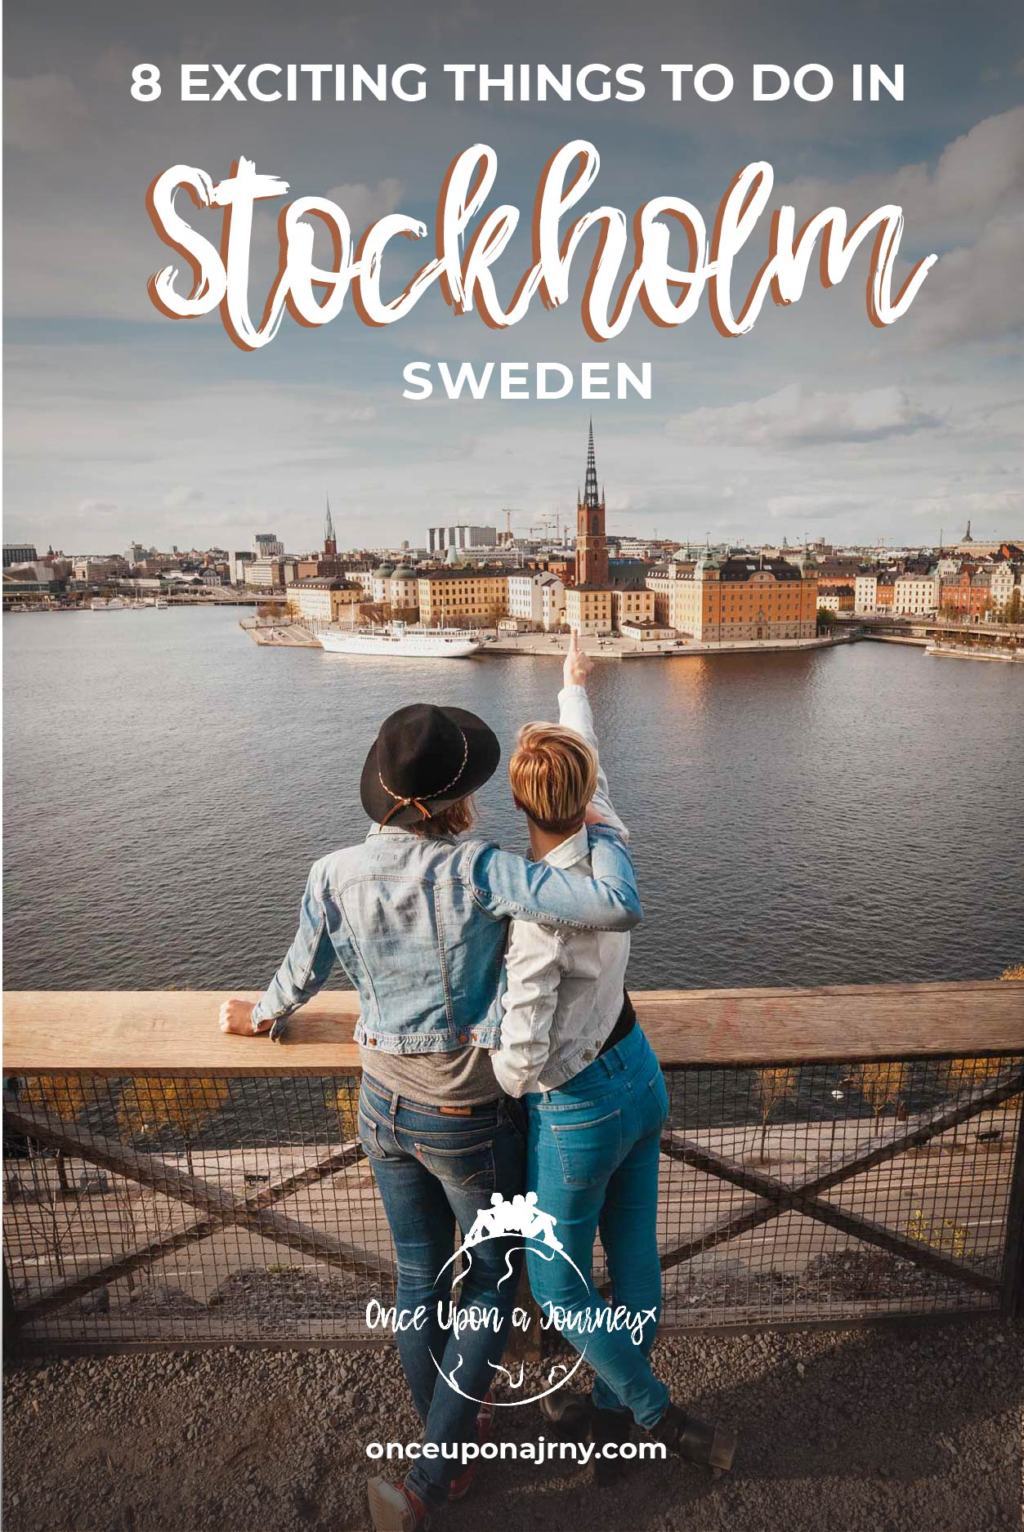 8 exciting things to do in Stockholm, Sweden